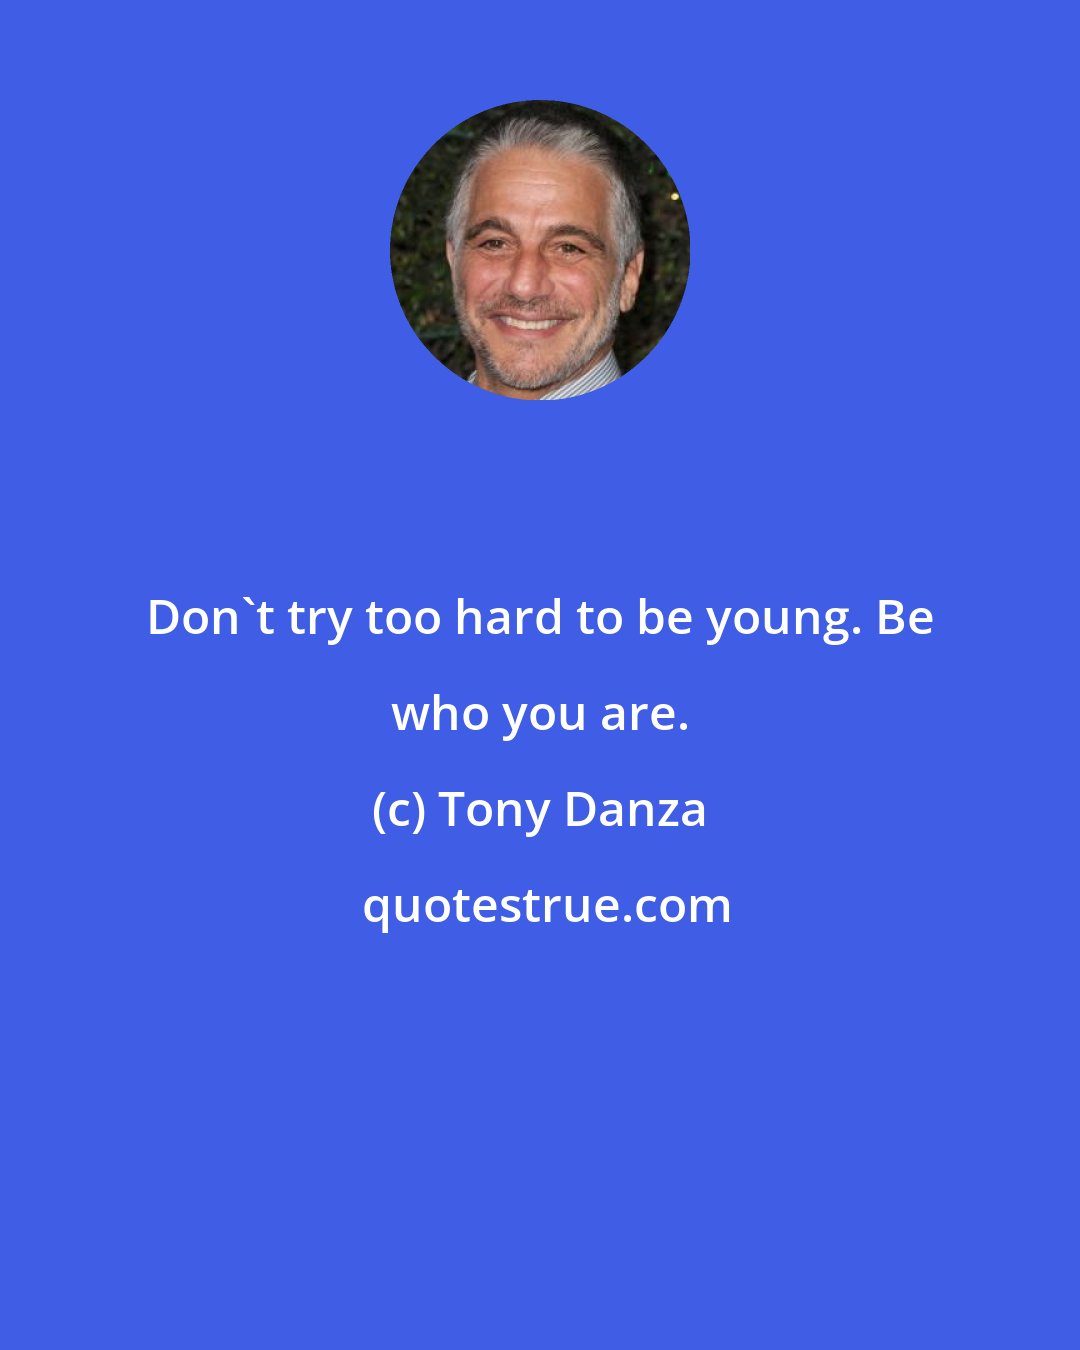 Tony Danza: Don't try too hard to be young. Be who you are.